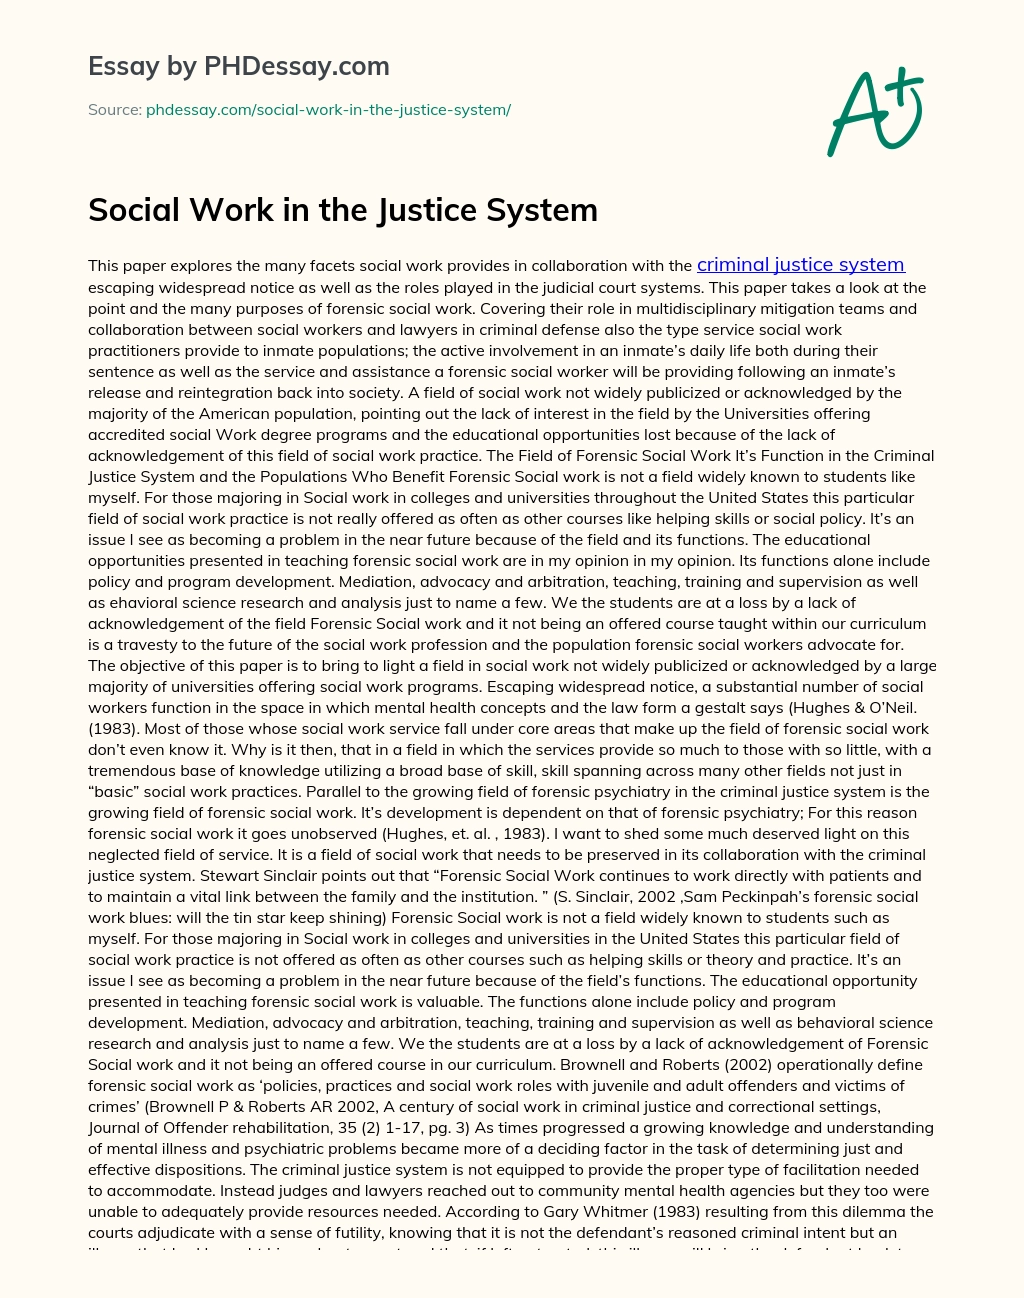 Social Work in the Justice System essay